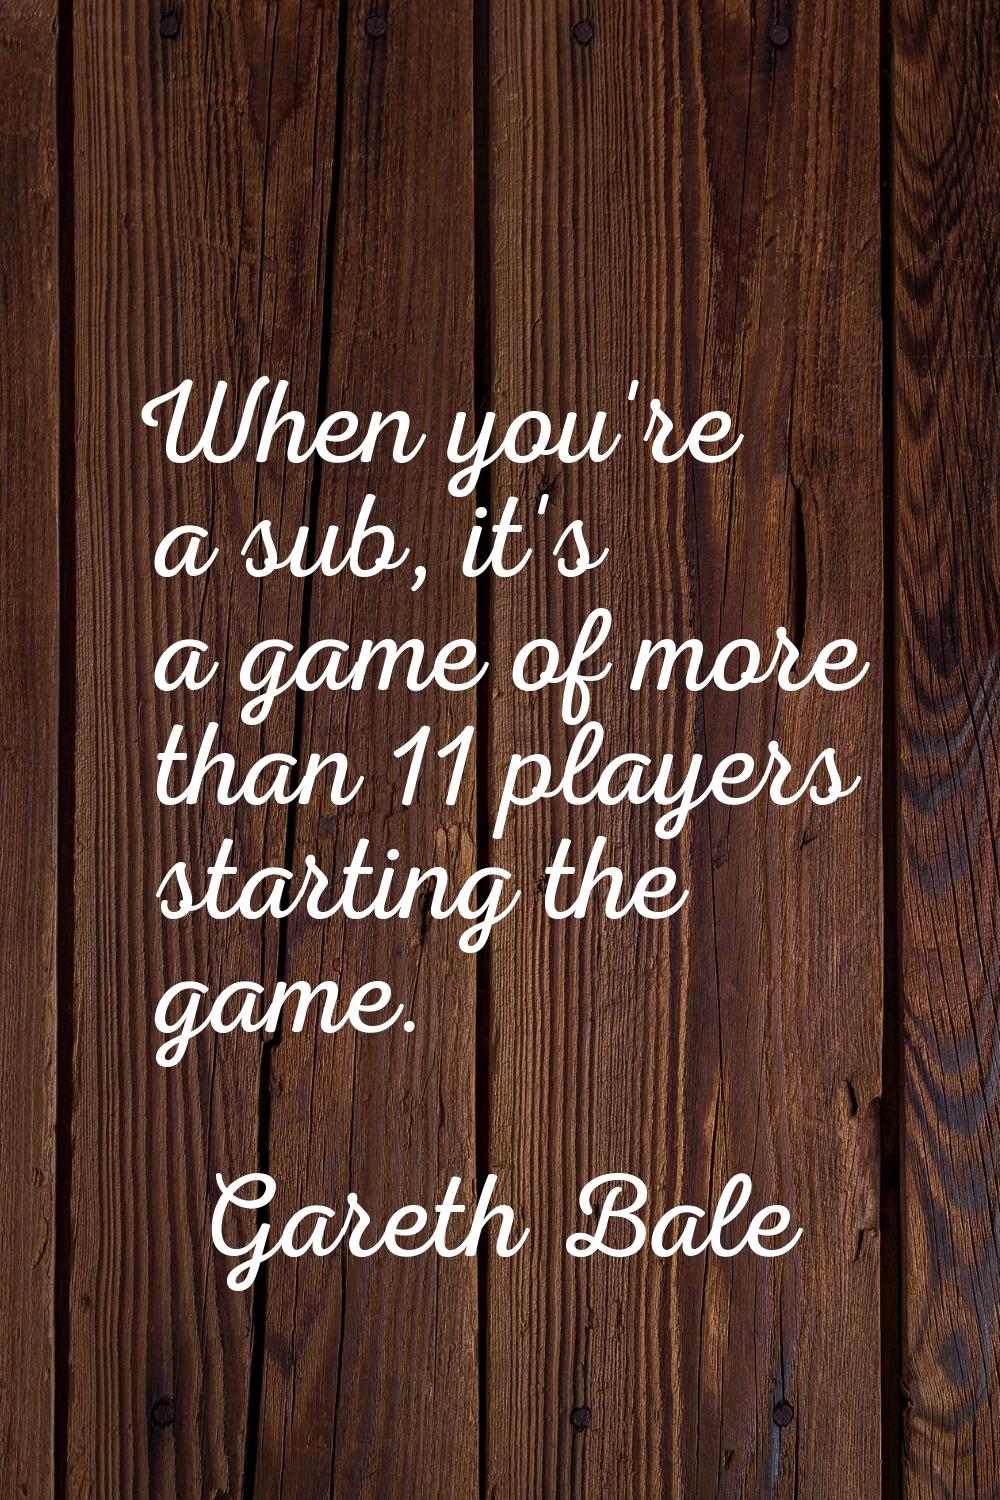 When you're a sub, it's a game of more than 11 players starting the game.